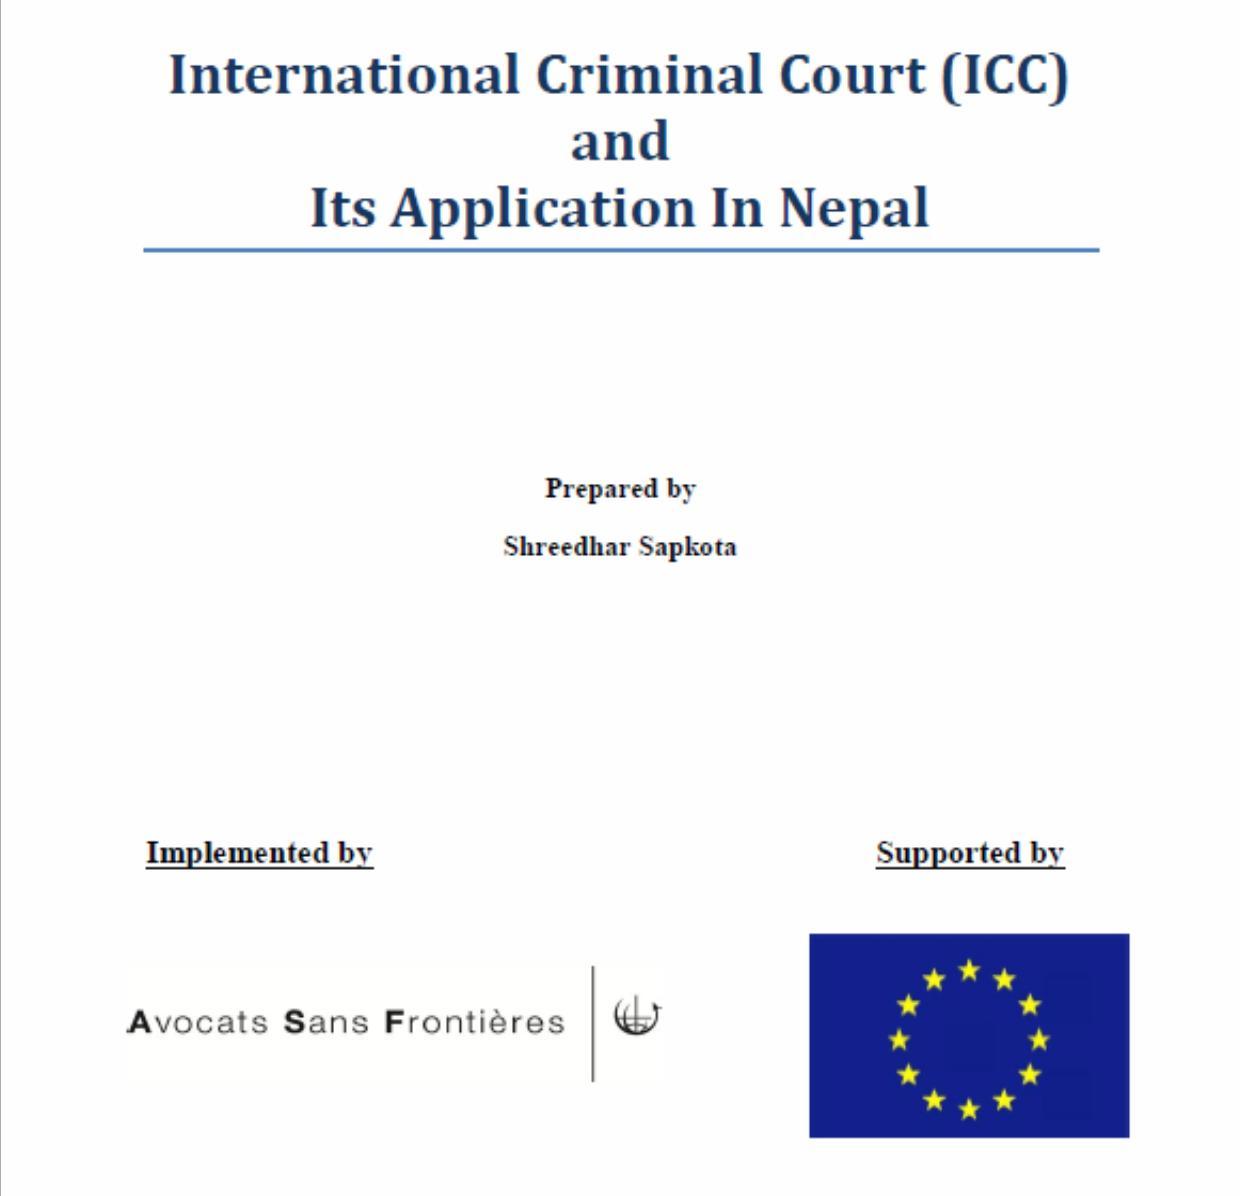 International Criminal Court (ICC) and Its Application In Nepal